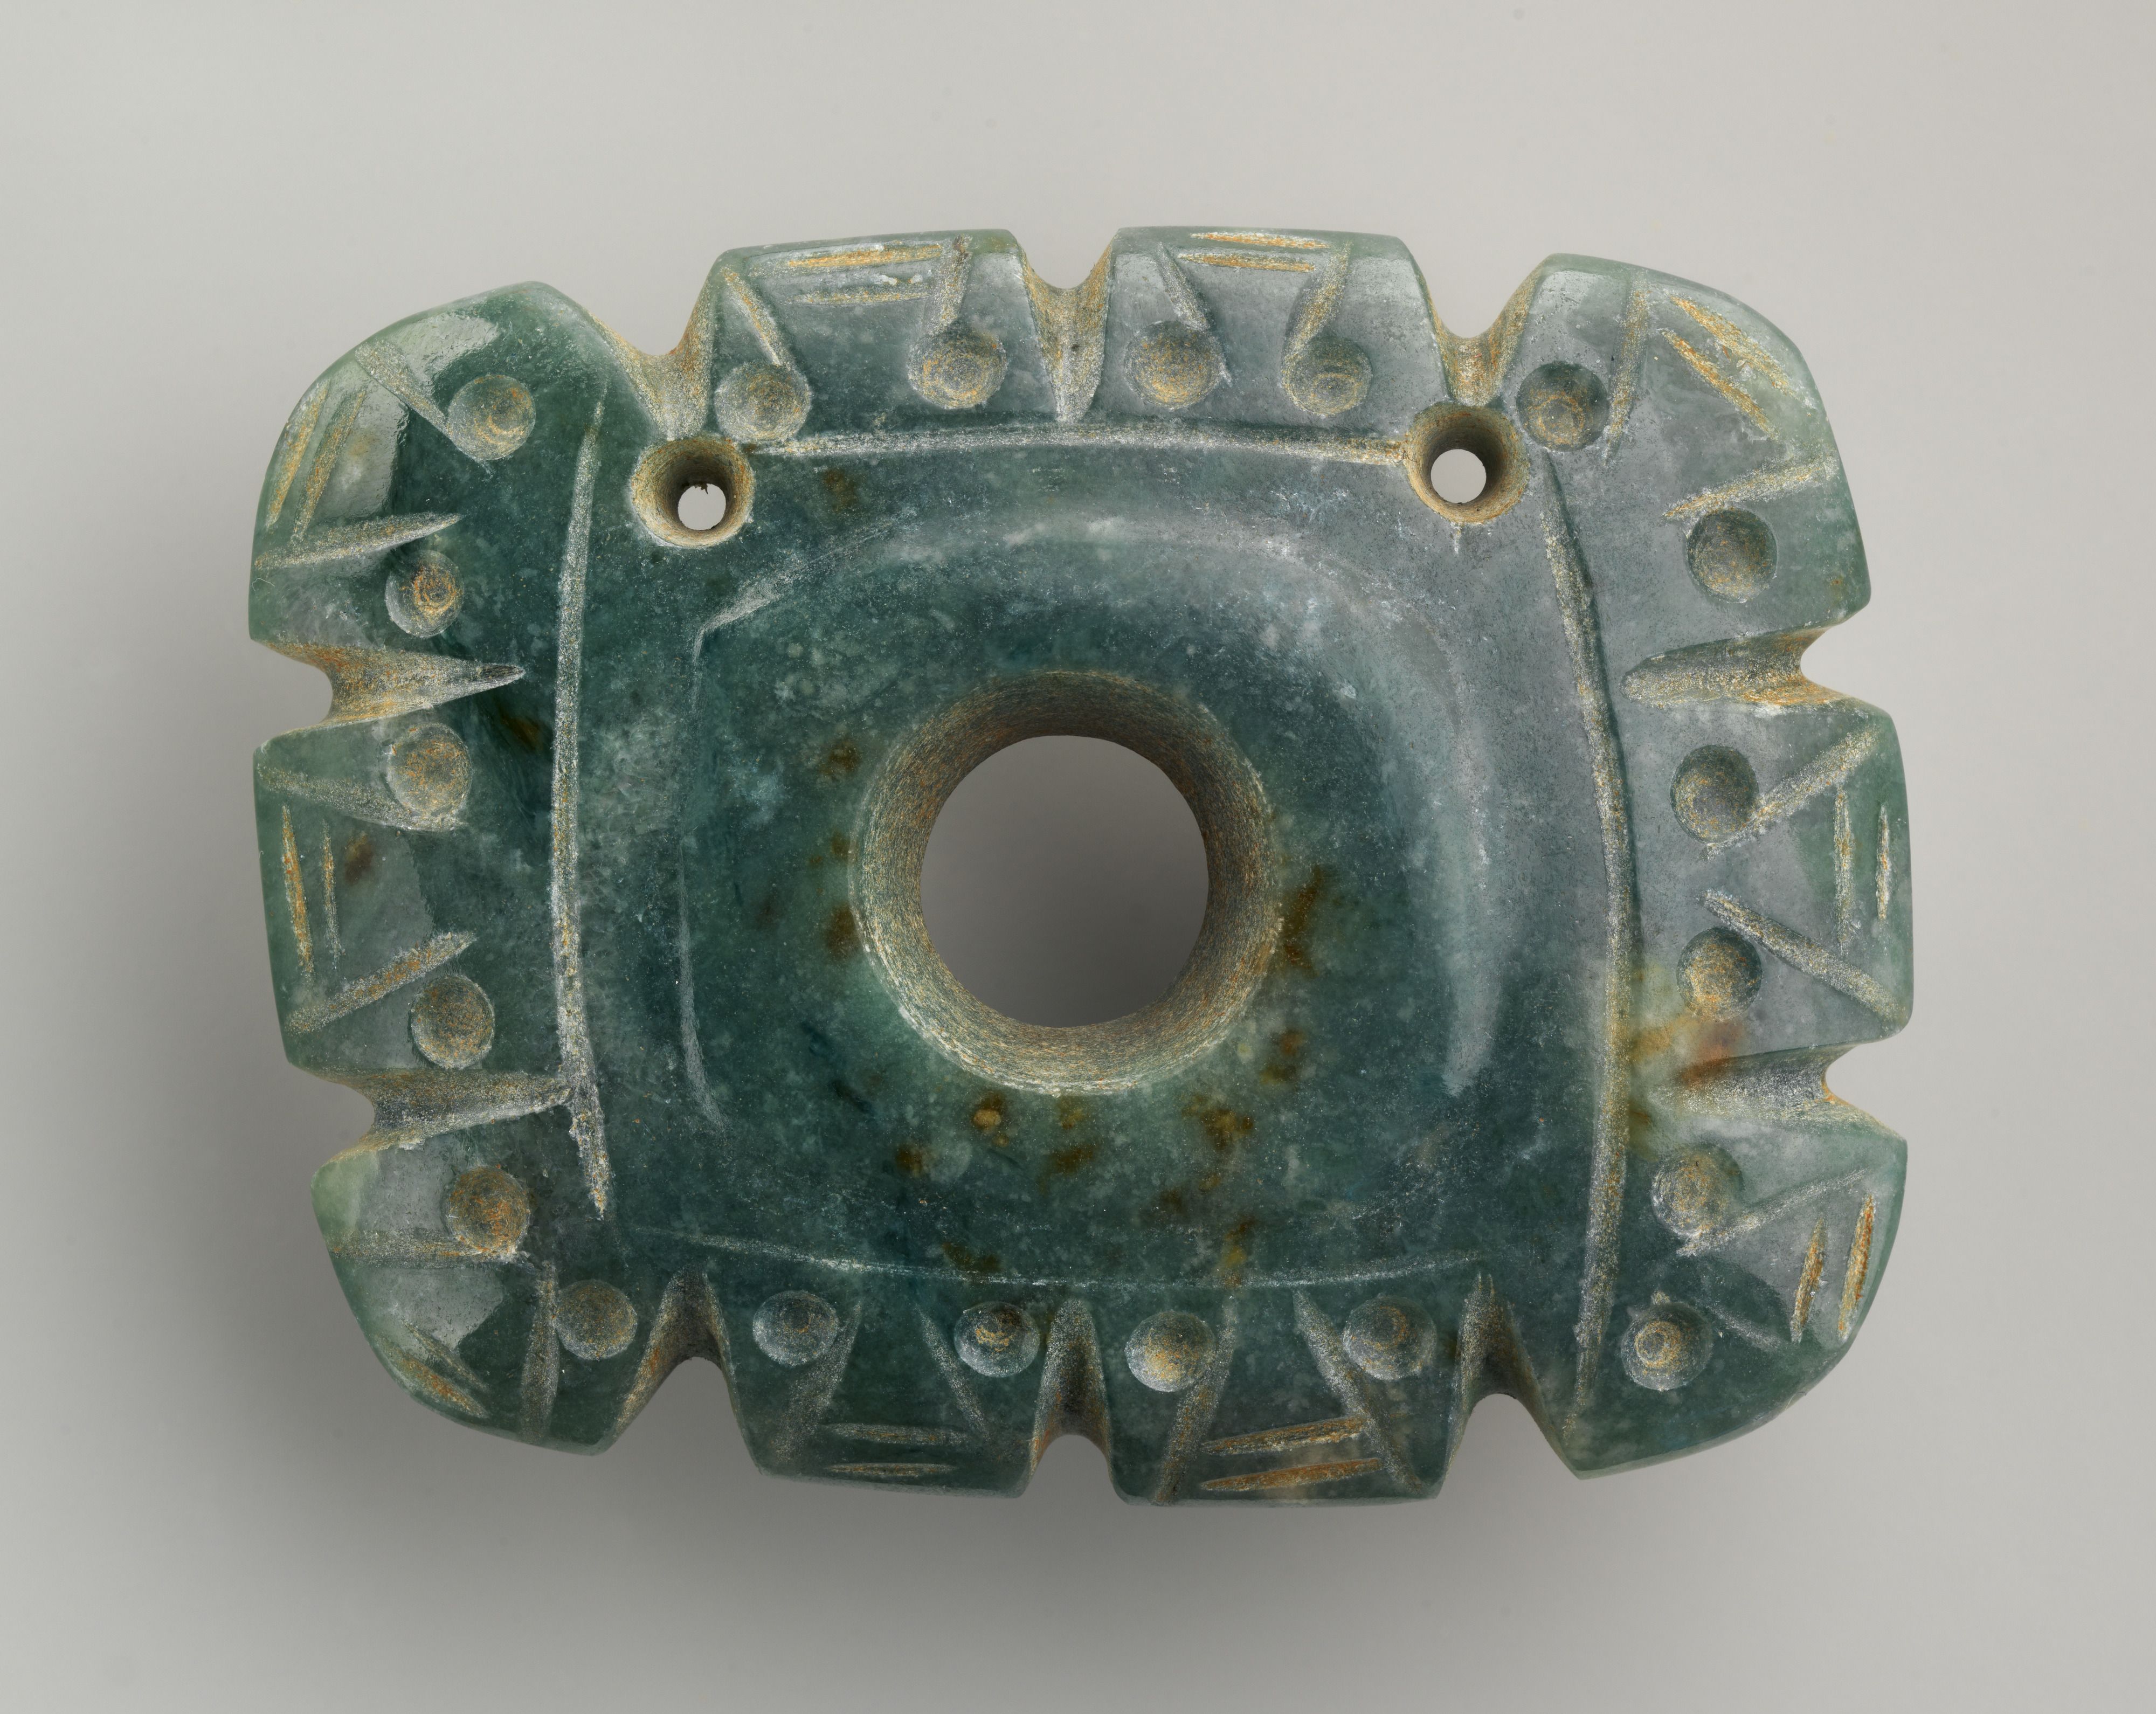 A small, rectangular, blue green jade pendant. The pendant has a large hole in the middle and two smaller ones above it. Carved heads with large eyes border the pendant.